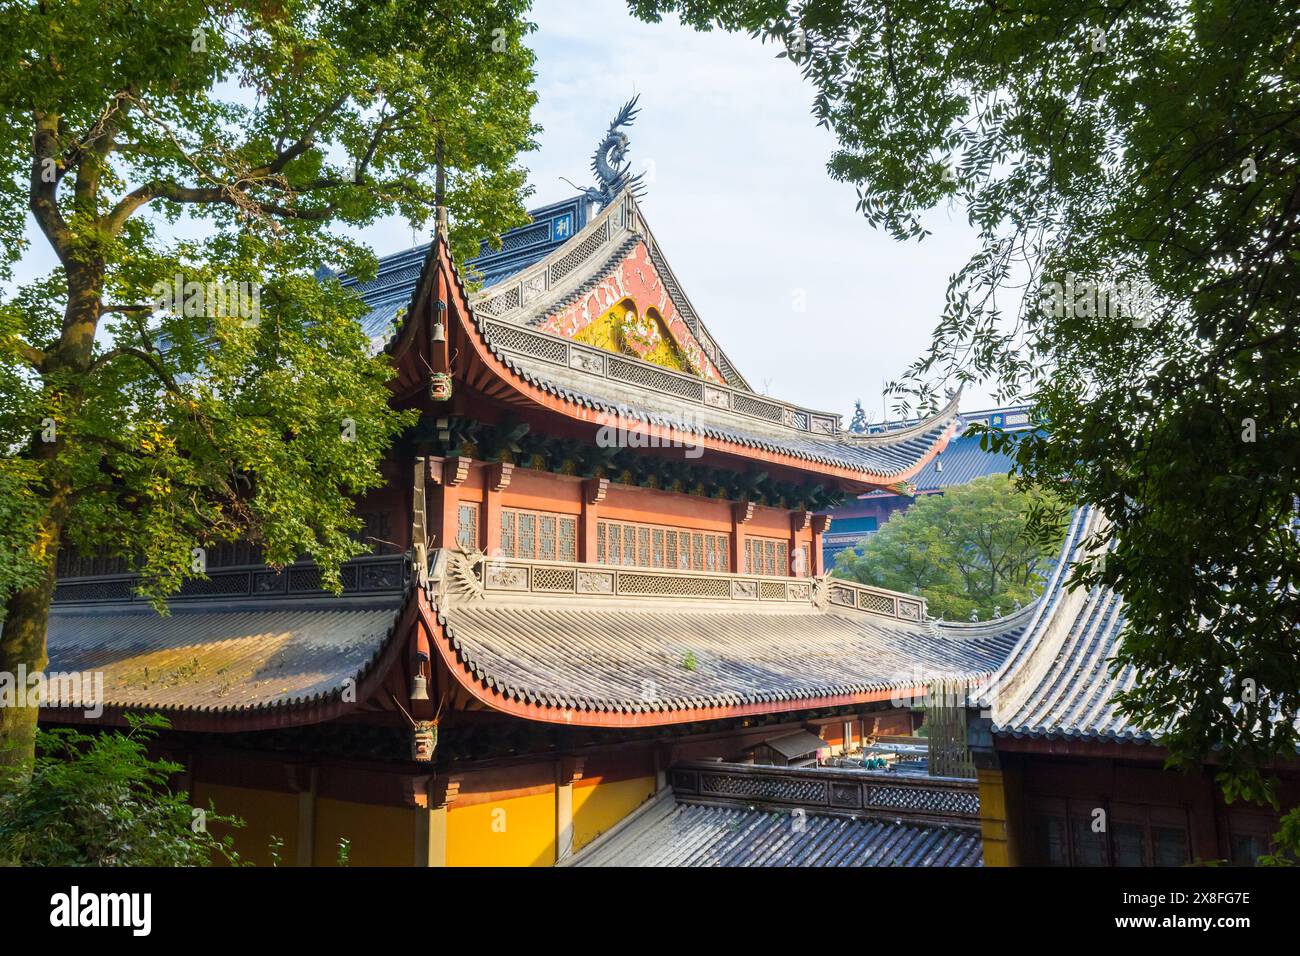 Decorated roof of the historic Lingyin Temple in Hangzhou, China Stock Photo